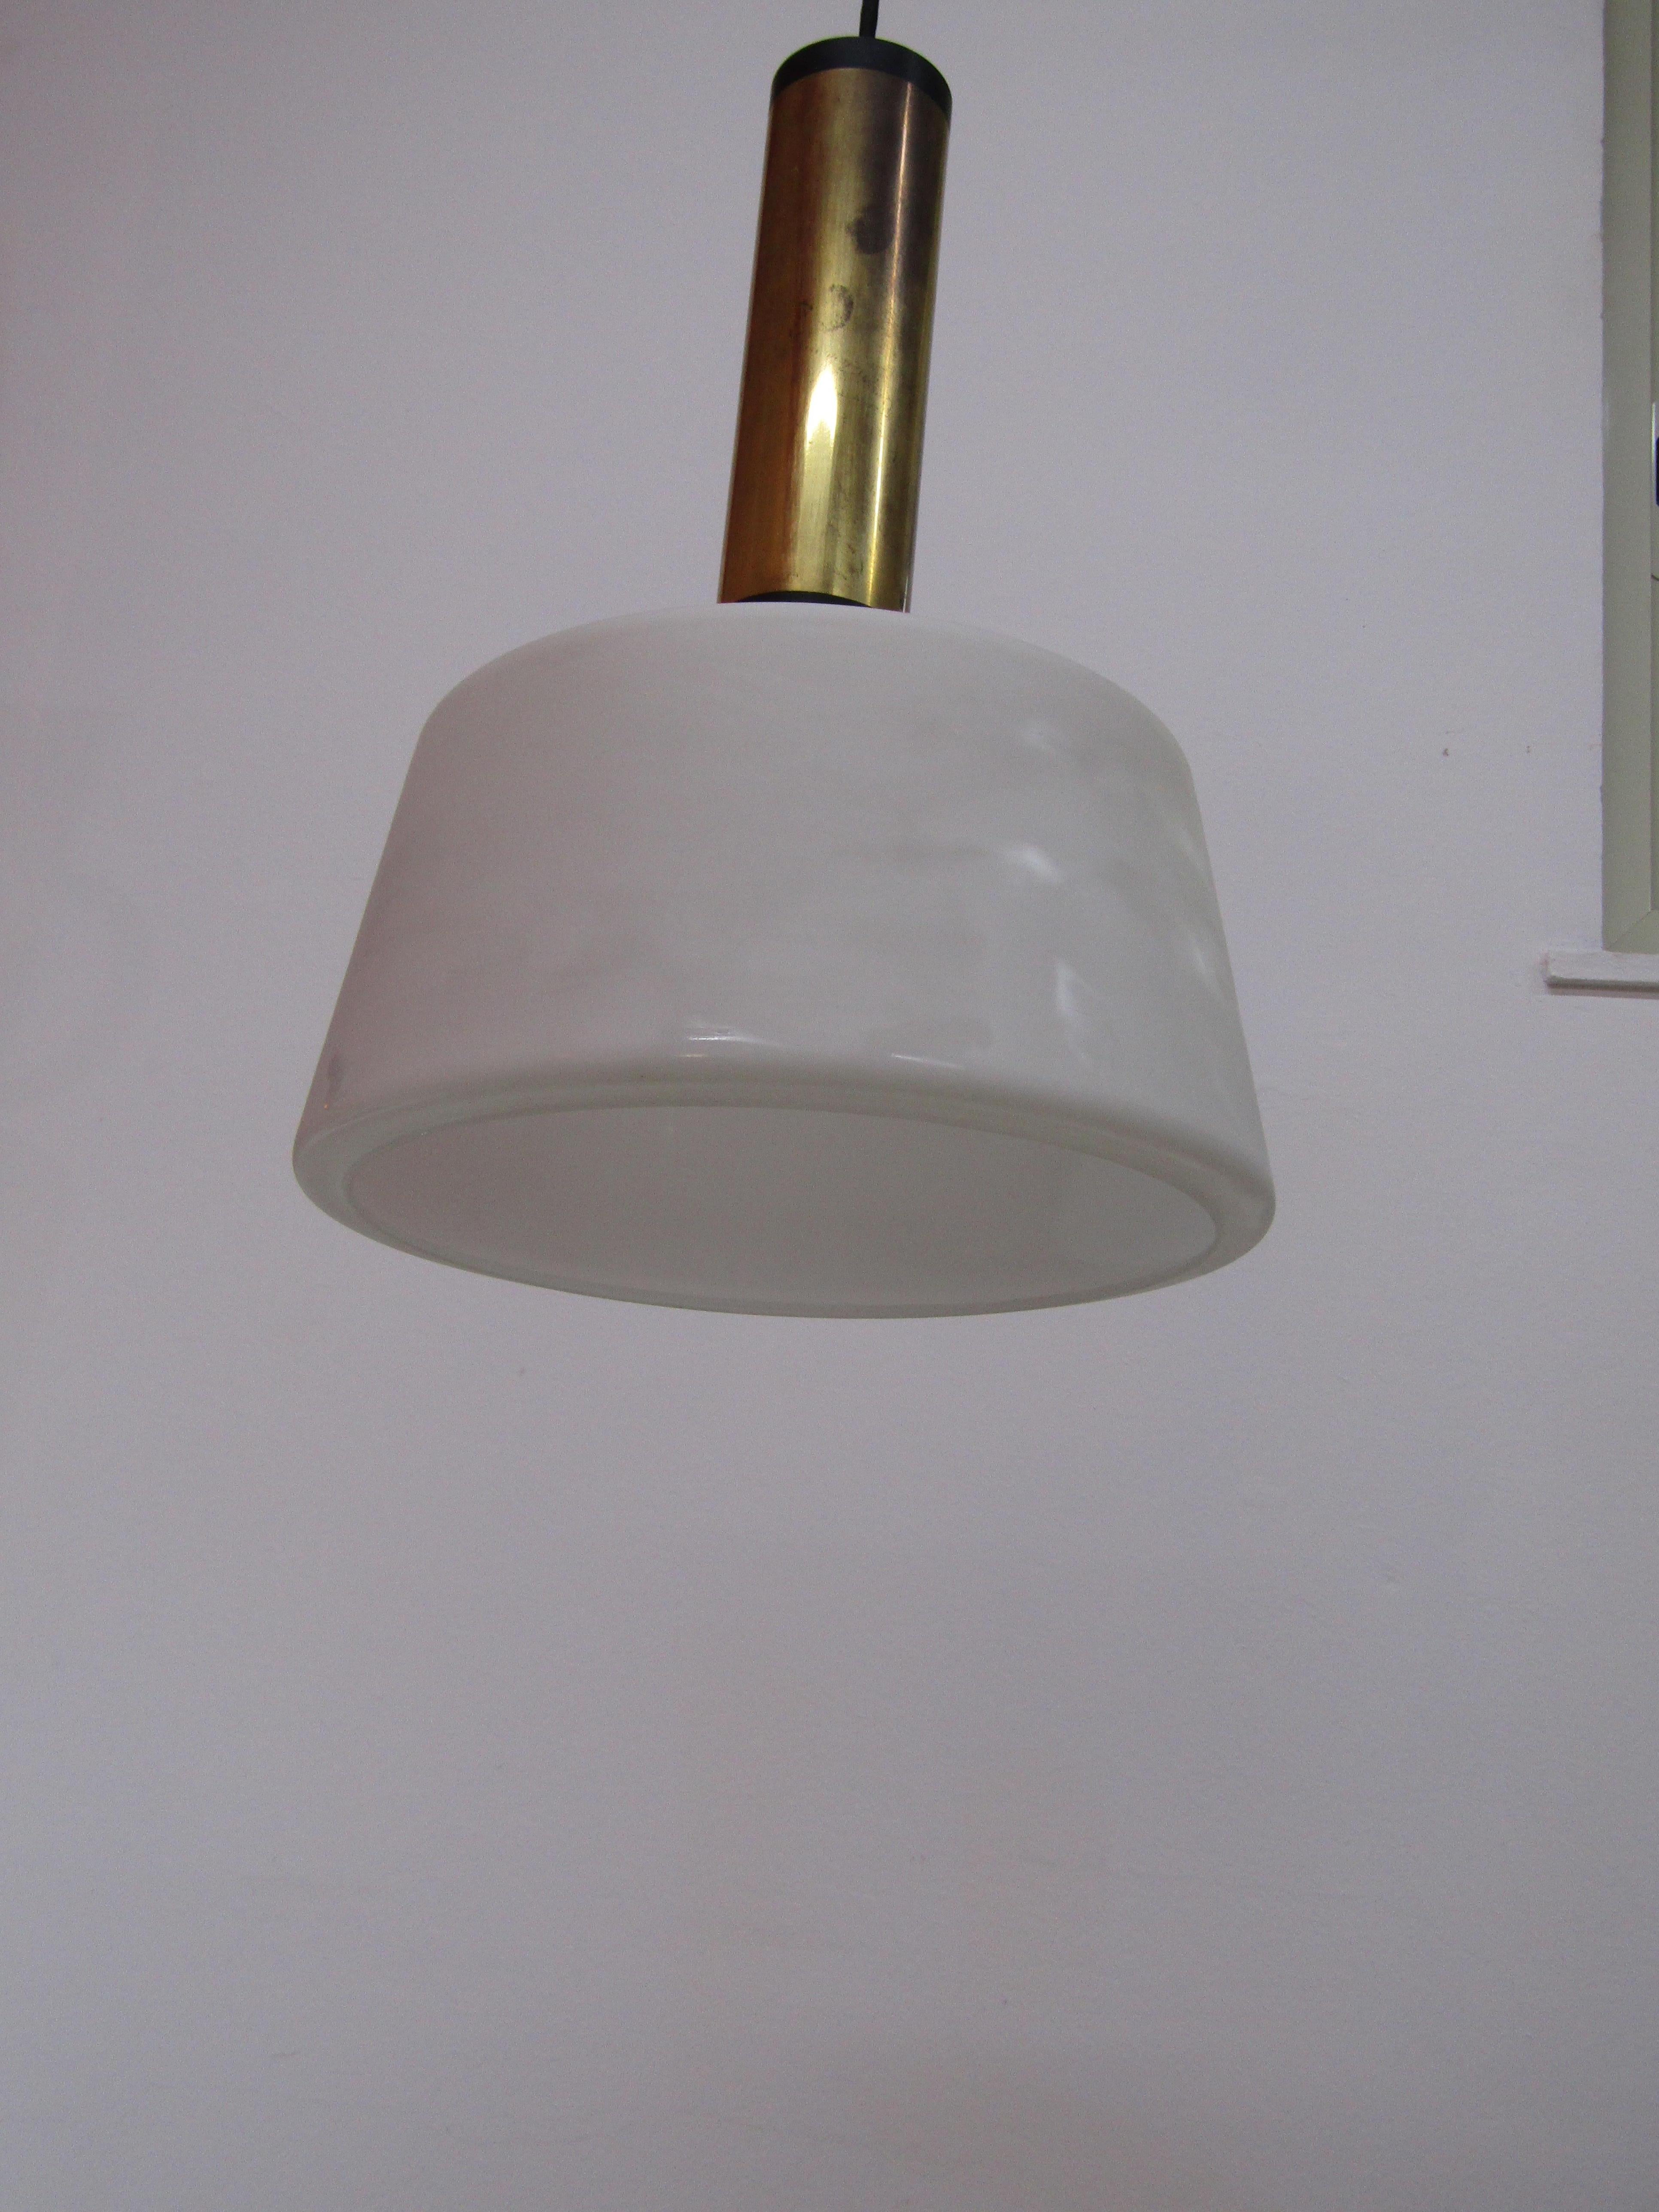 Suspension lamp made by Stilnovo in Italy with a brass structure and  midcentury For Sale 3